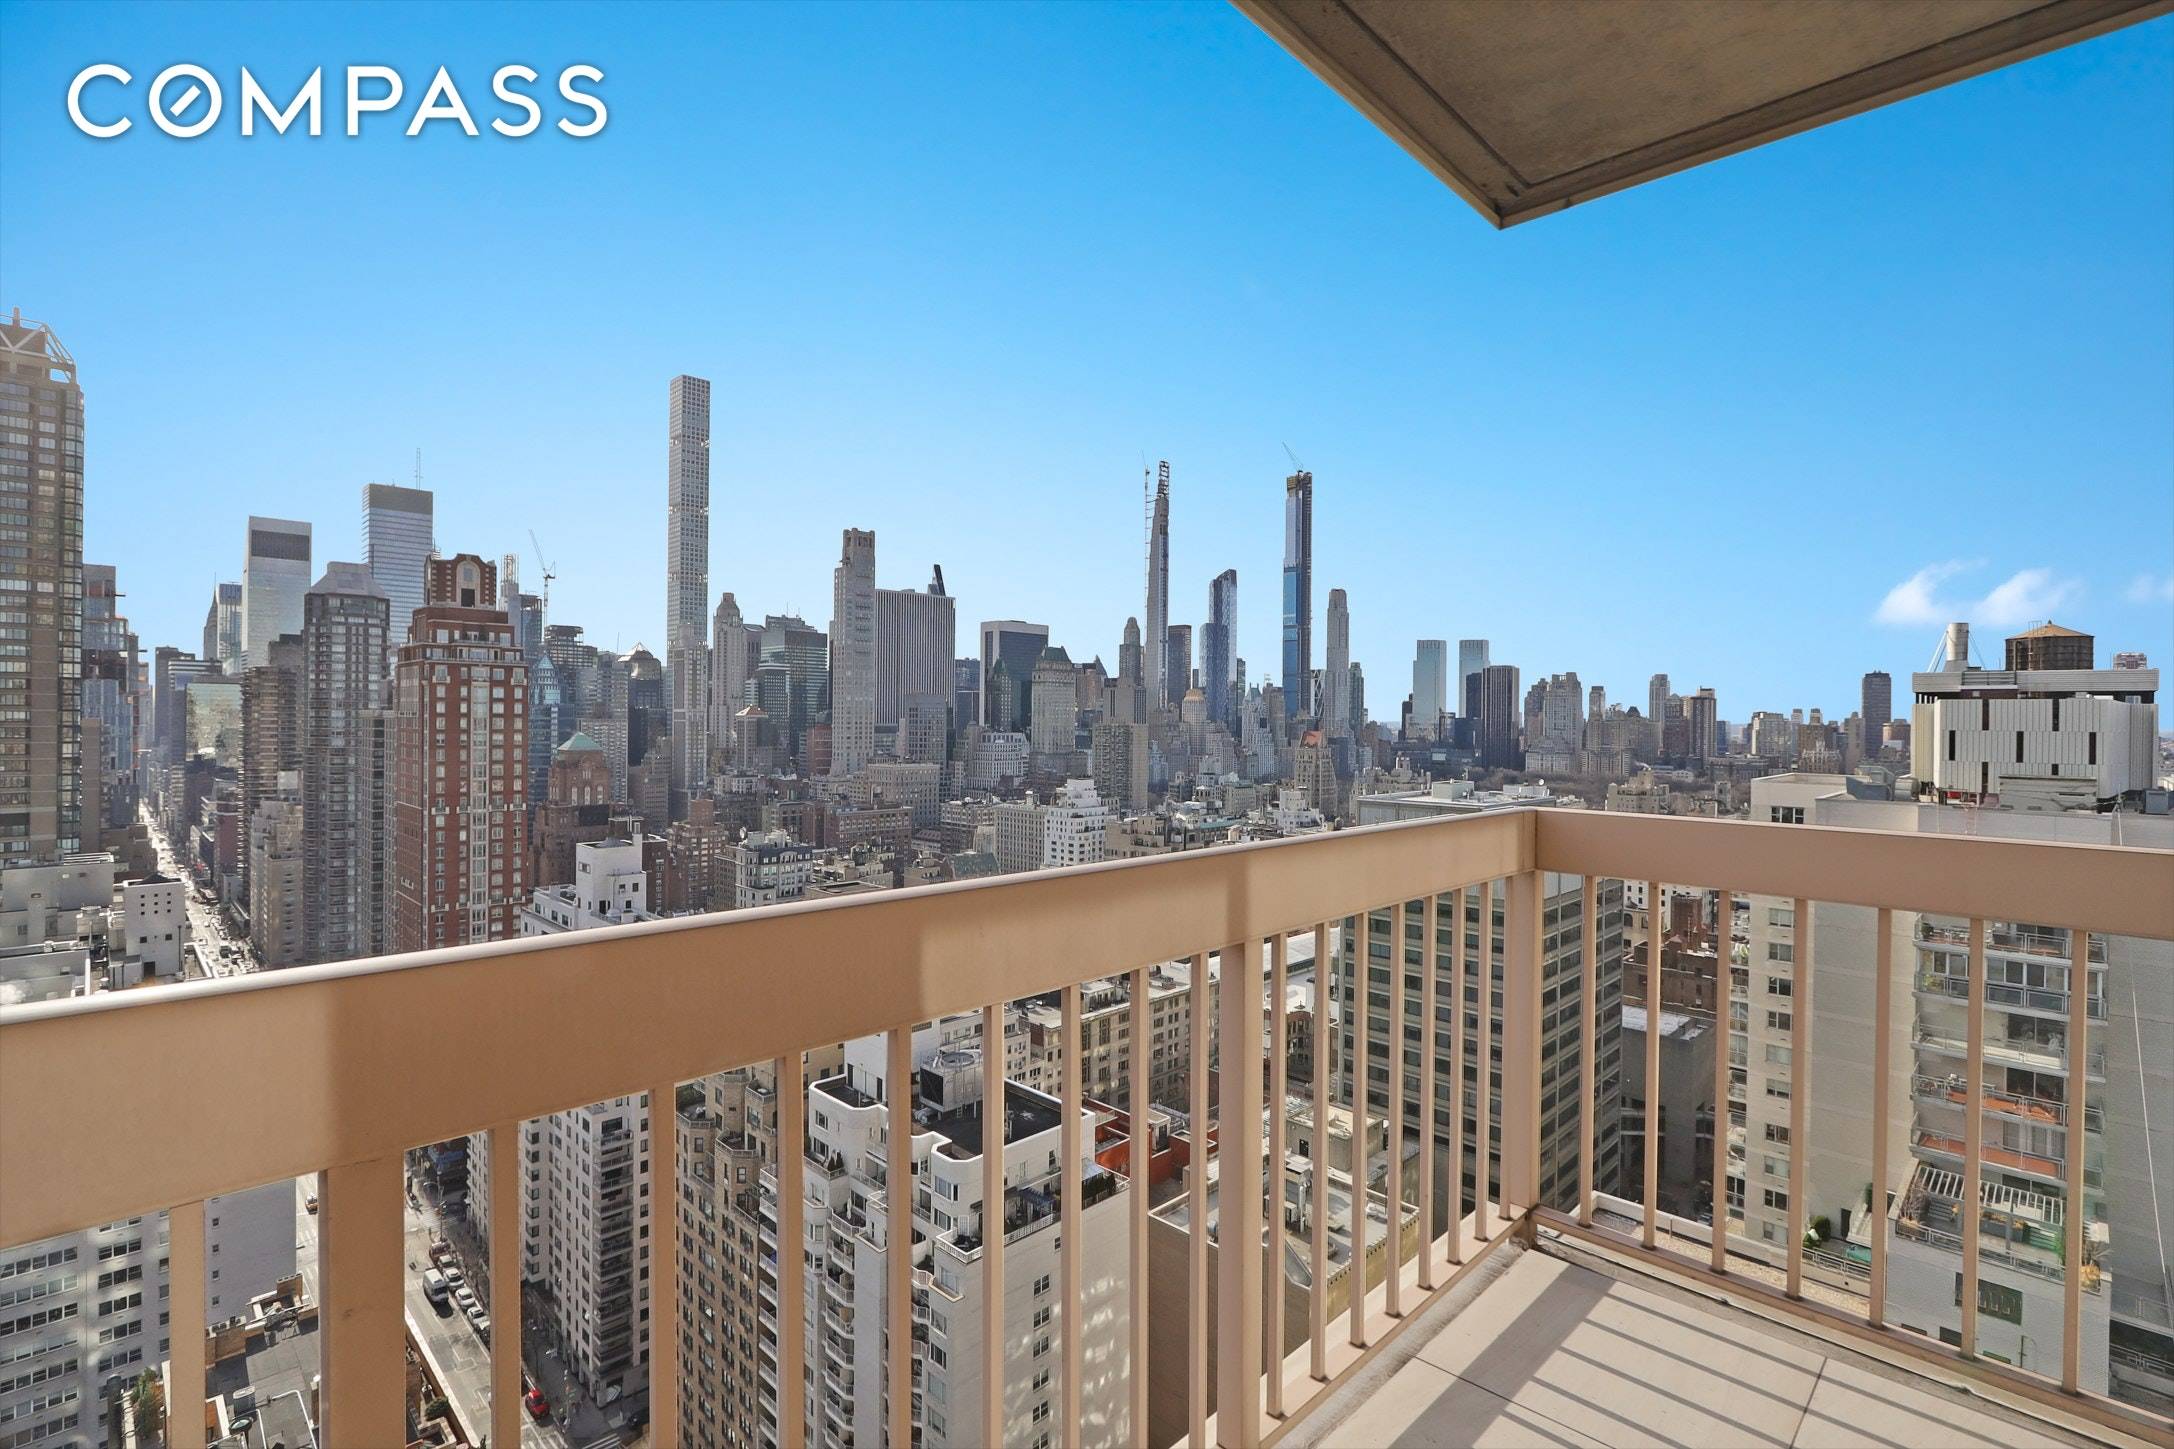 BEYOND BEAUTIFUL EPIC CITY amp ; PARK FOREVER VIEWS FRESHLY RENOVATED, JAW DROPPING, FIVE DIAMOND MASTERPIECE DIVINE, DOUBLE CORNER, DESIGNER STUNNER w TWO PRIVATE BALCONIES CAN BE PURCHASED FURNISHED IF ...